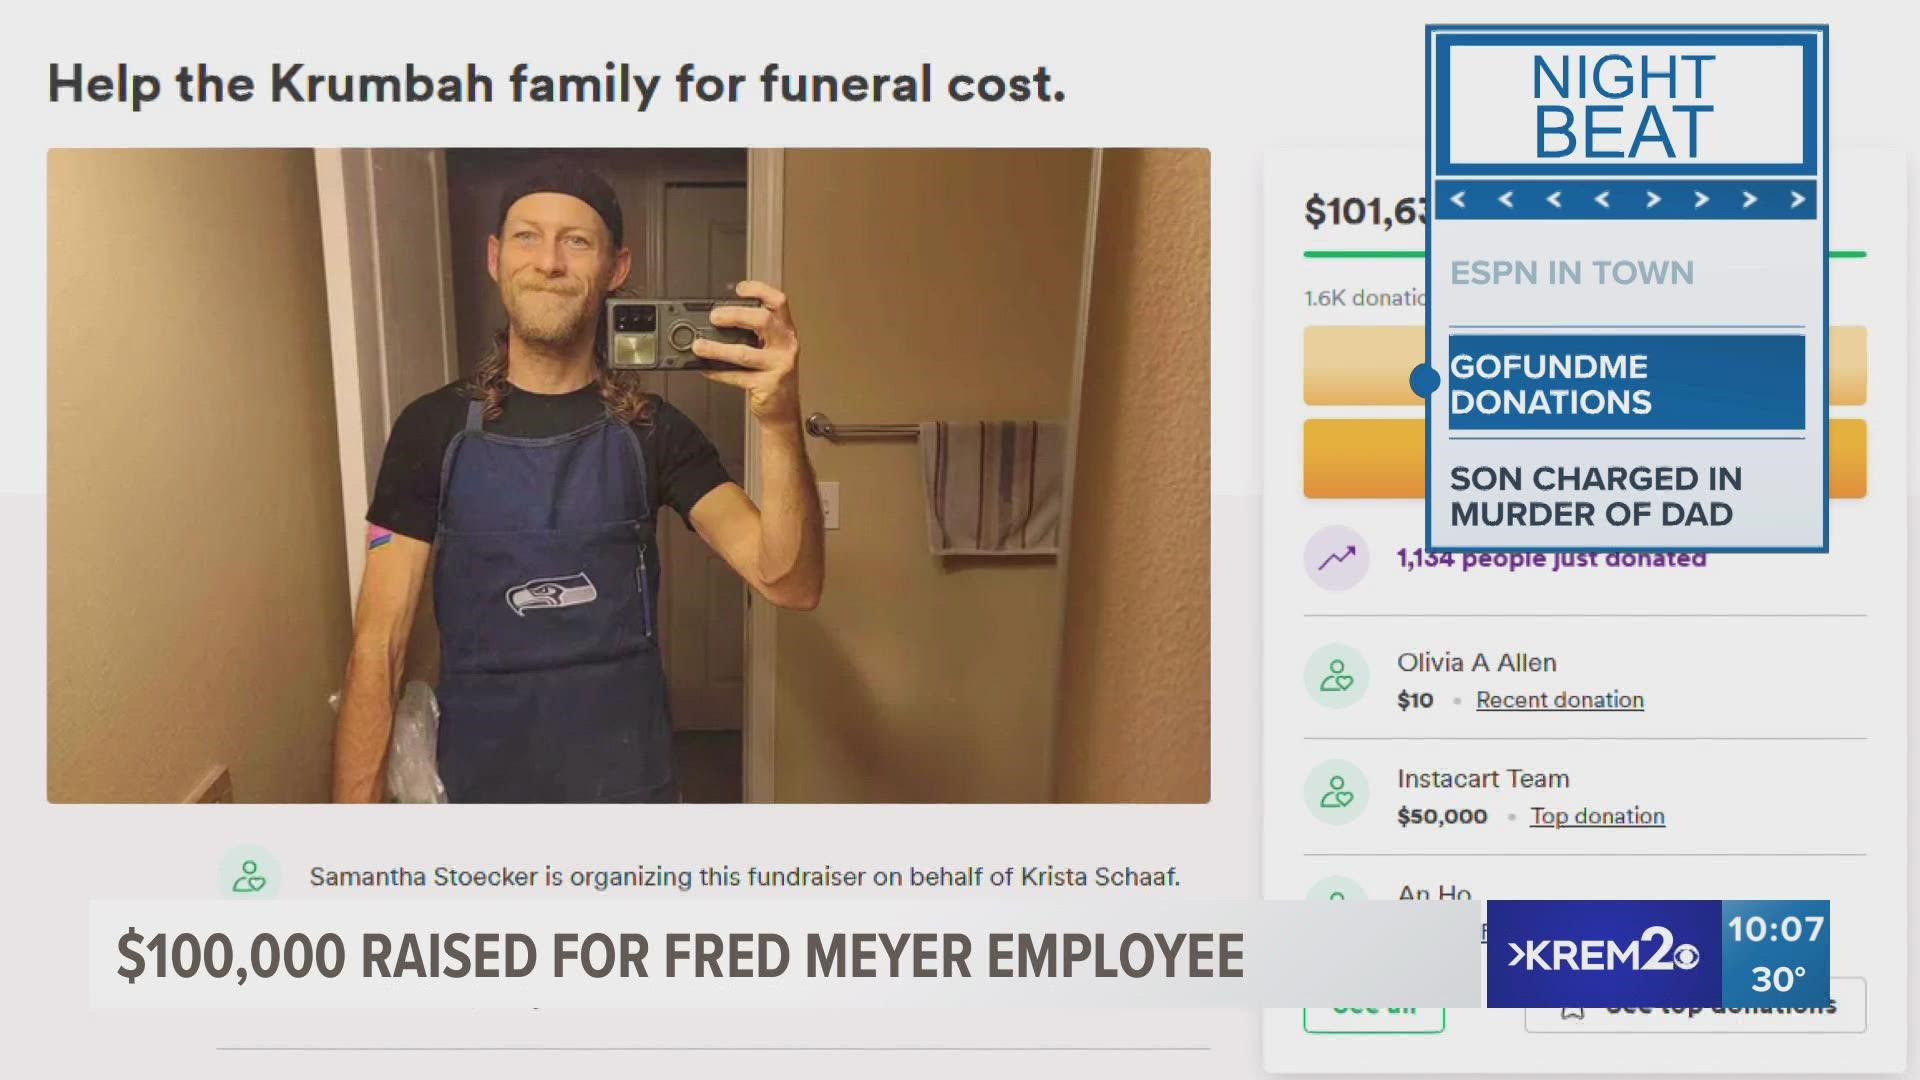 Justin Krumbah worked for the grocery delivery service Instacart. The company donated $50,000 to the GoFundMe page.